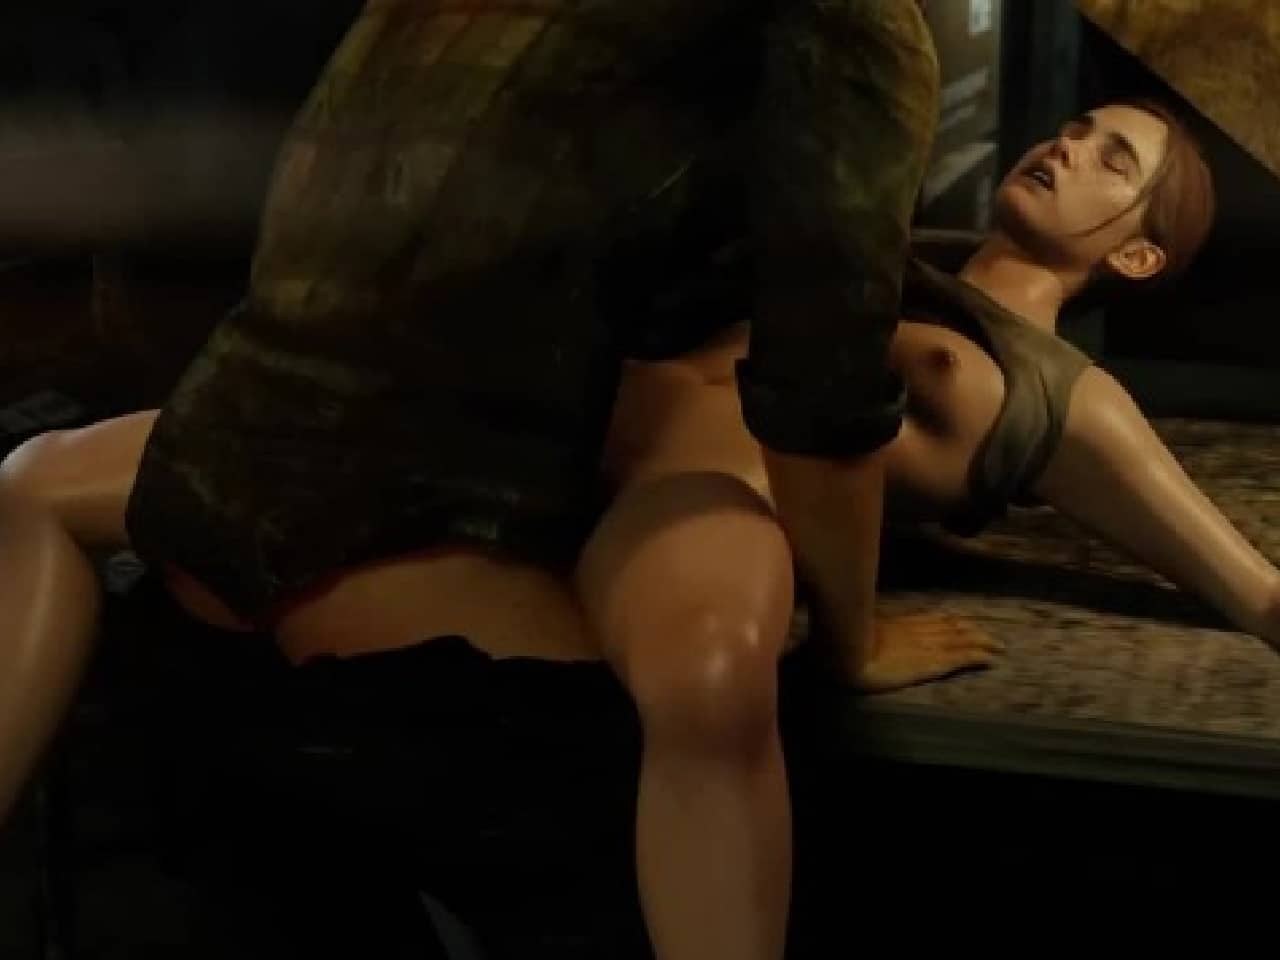 Sarah From The Last Of Us Porn